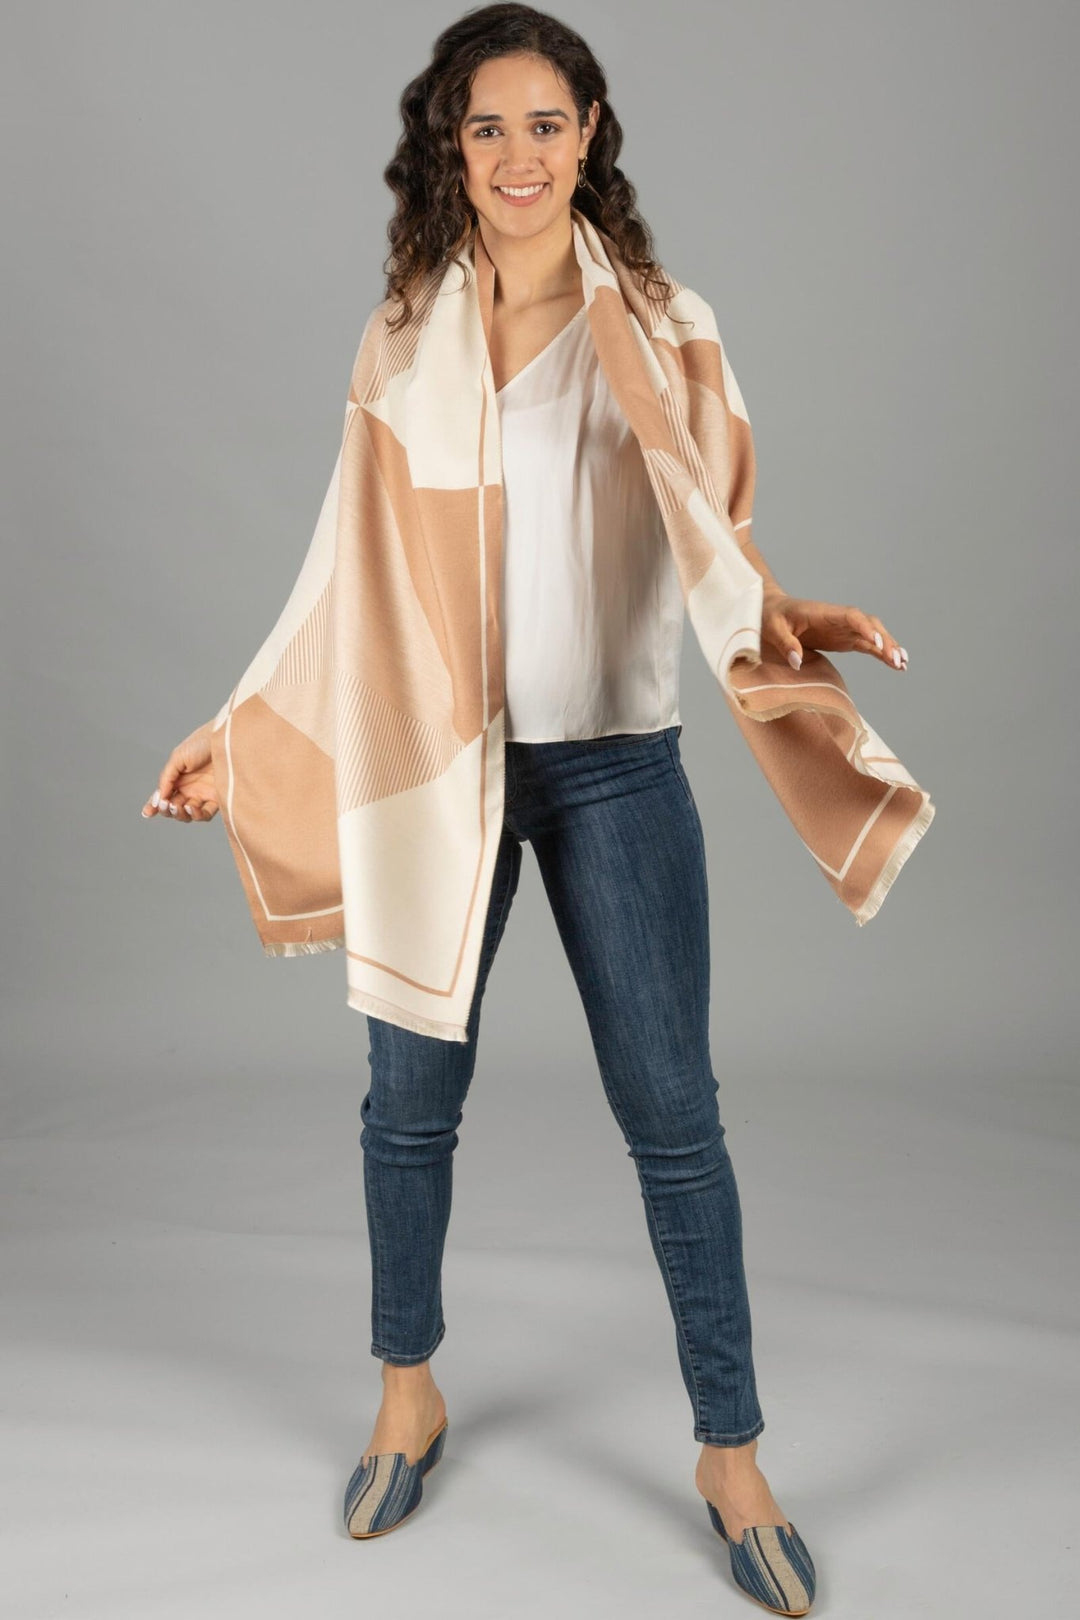 All About the Angles Reversible Scarf - SAACHI - Beige - Scarves